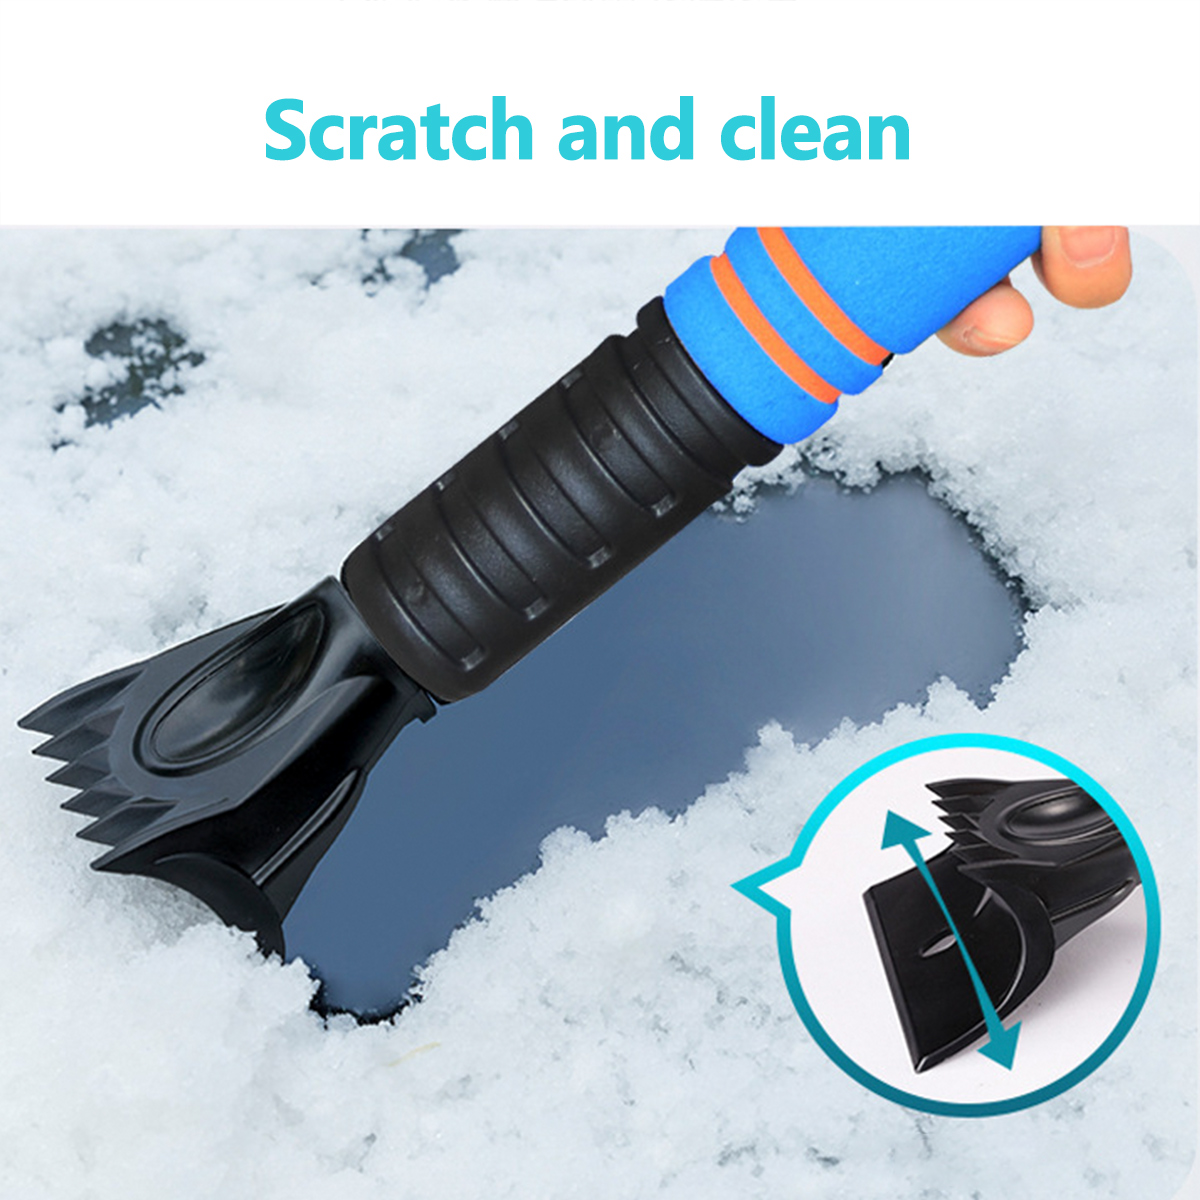 56CM-Telescopic-Rotating-Snow-Shovel-With-Gloves-Vehicle-Winter-Shoveling-Snow-Tools-1786471-3